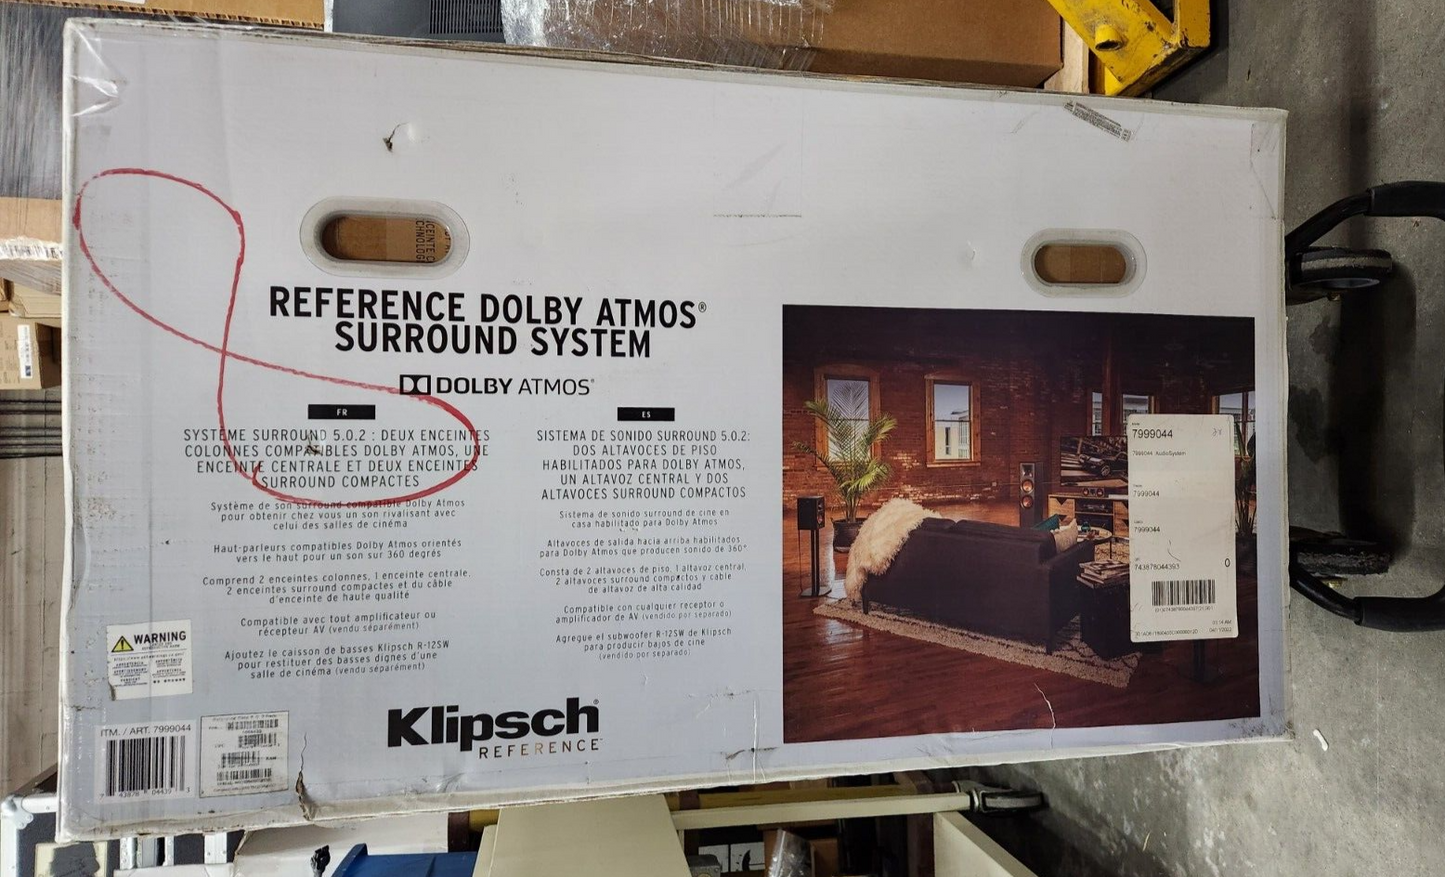 Klipsch Reference Dolby Atmos 5.0.2 Home Theater System NIB